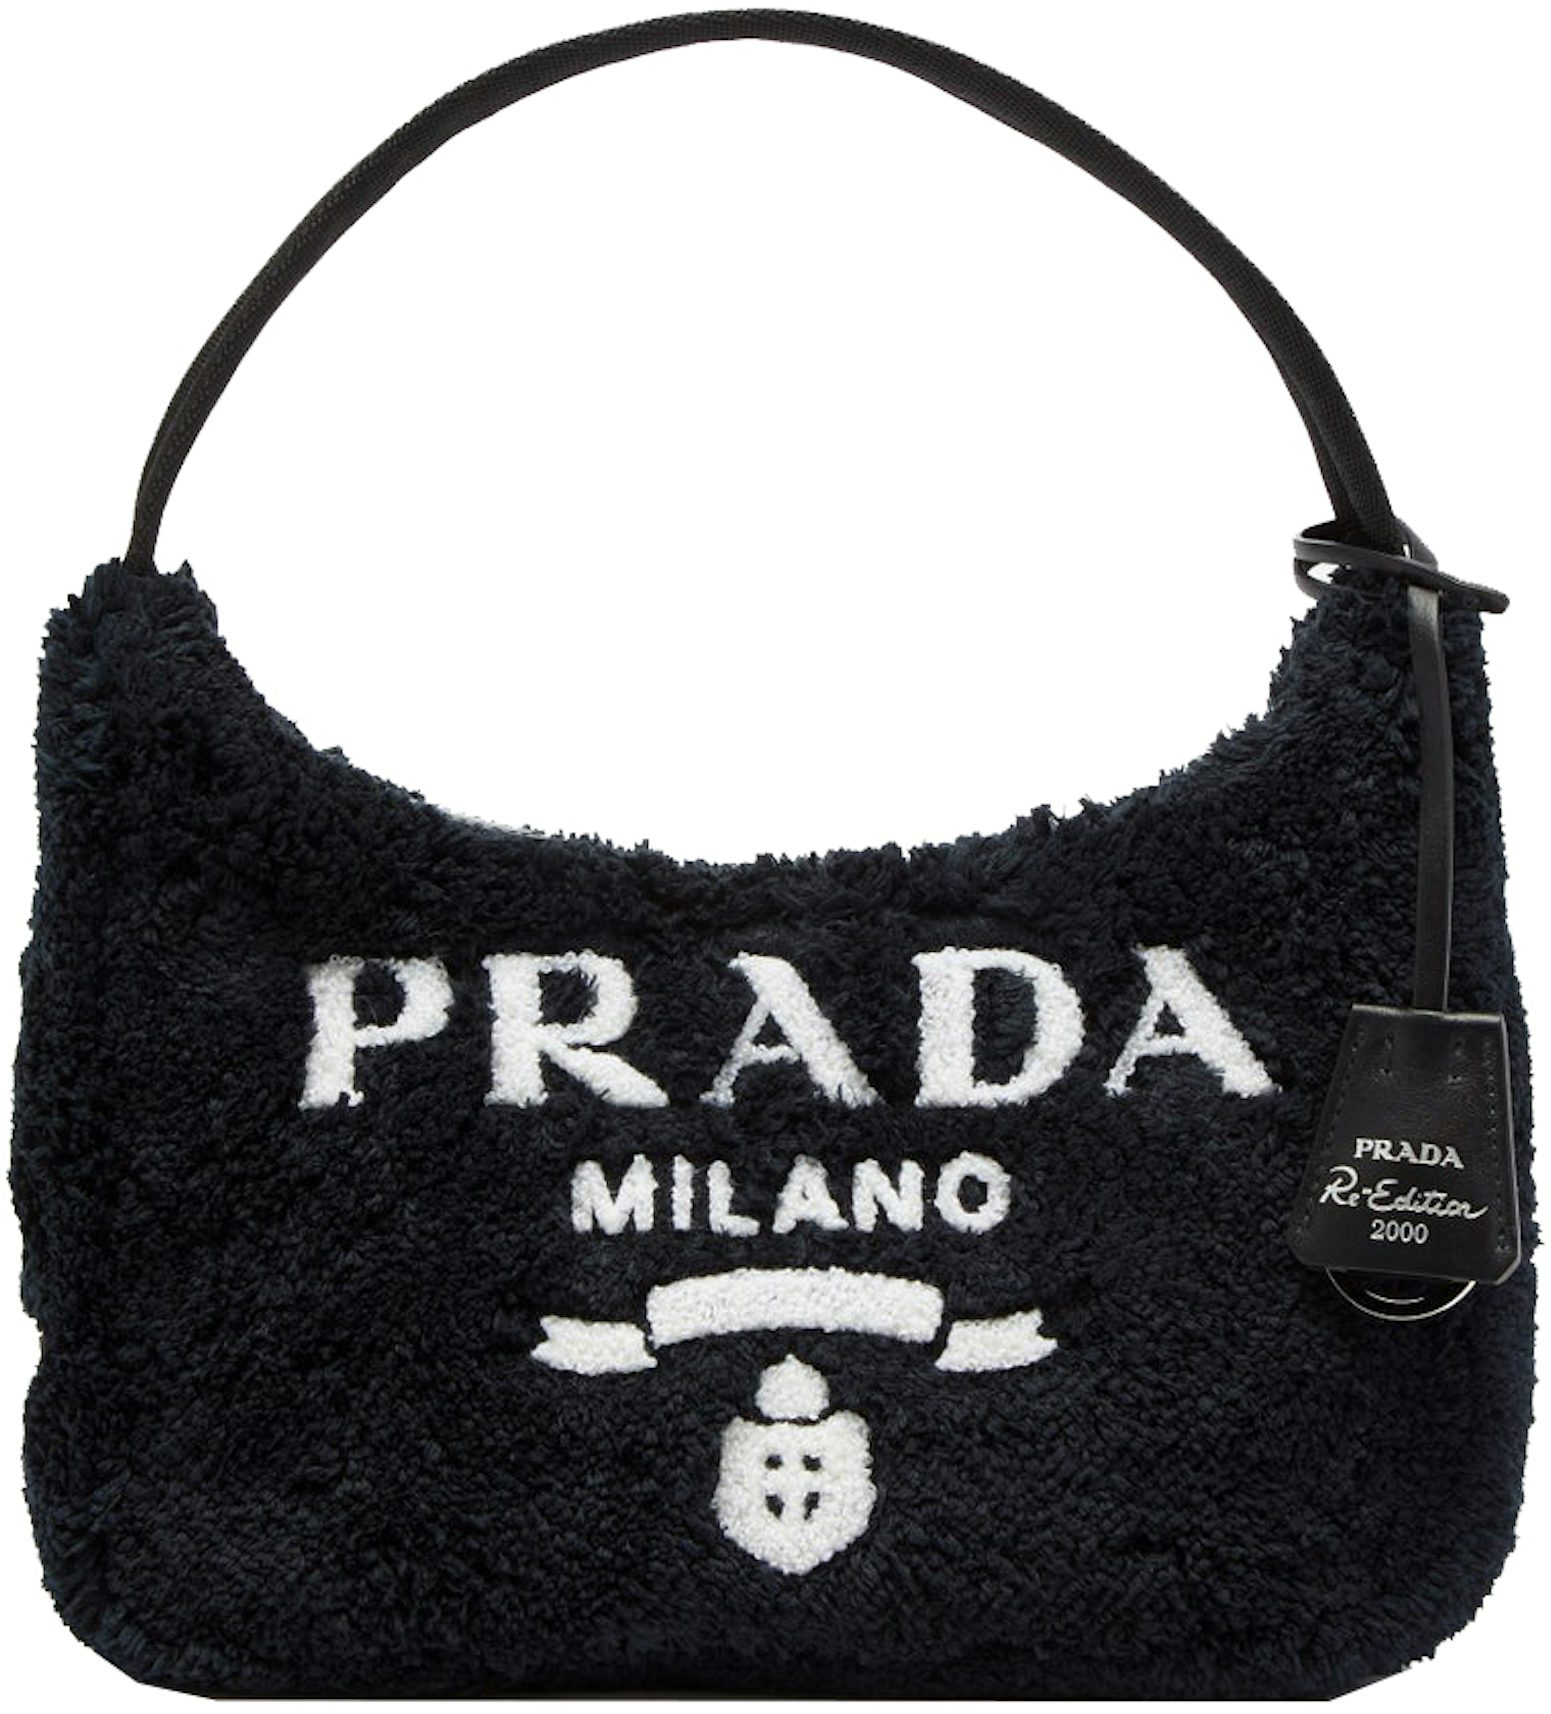 StockX on X: A trendy take on a classic shape 🖤 Prada's Re-Edition bag  finds a balance between the micro, bumbag, and crossbody obsessions. Shop  the Prada Re-Edition Nylon Bag on StockX